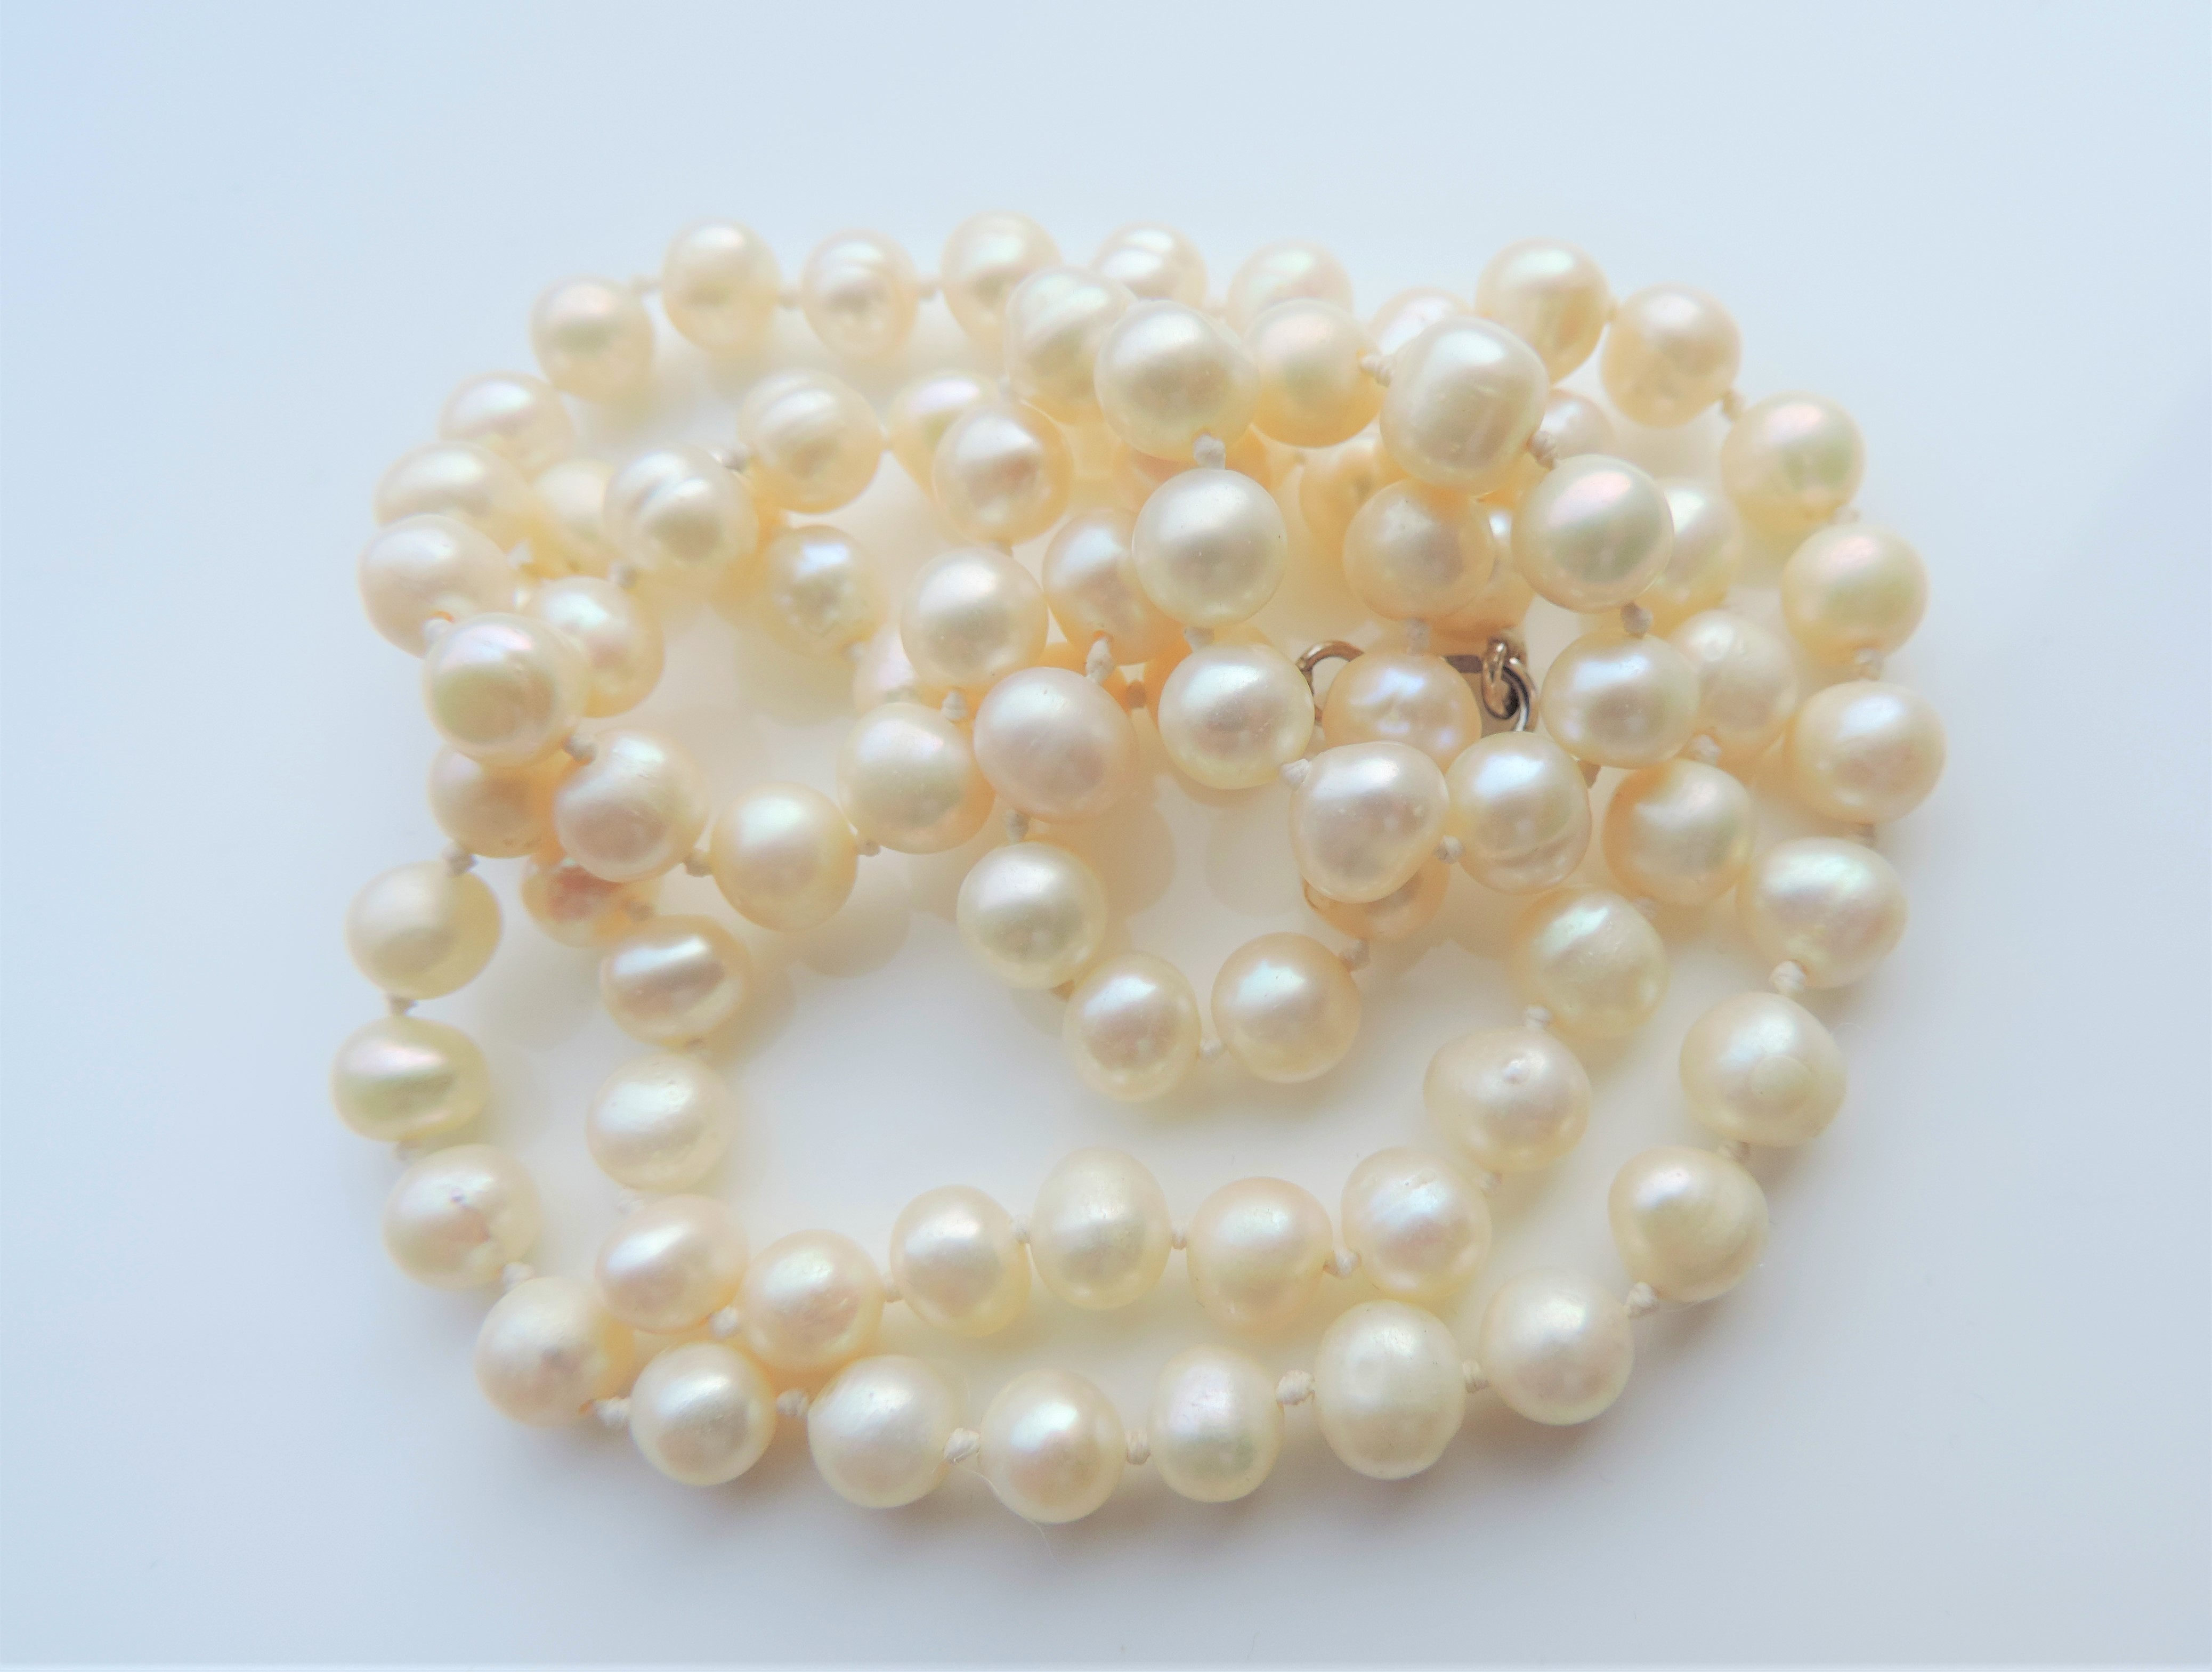 24 Inch Cultured Pearl Necklace 86 x 6mm Pearls - Image 3 of 3